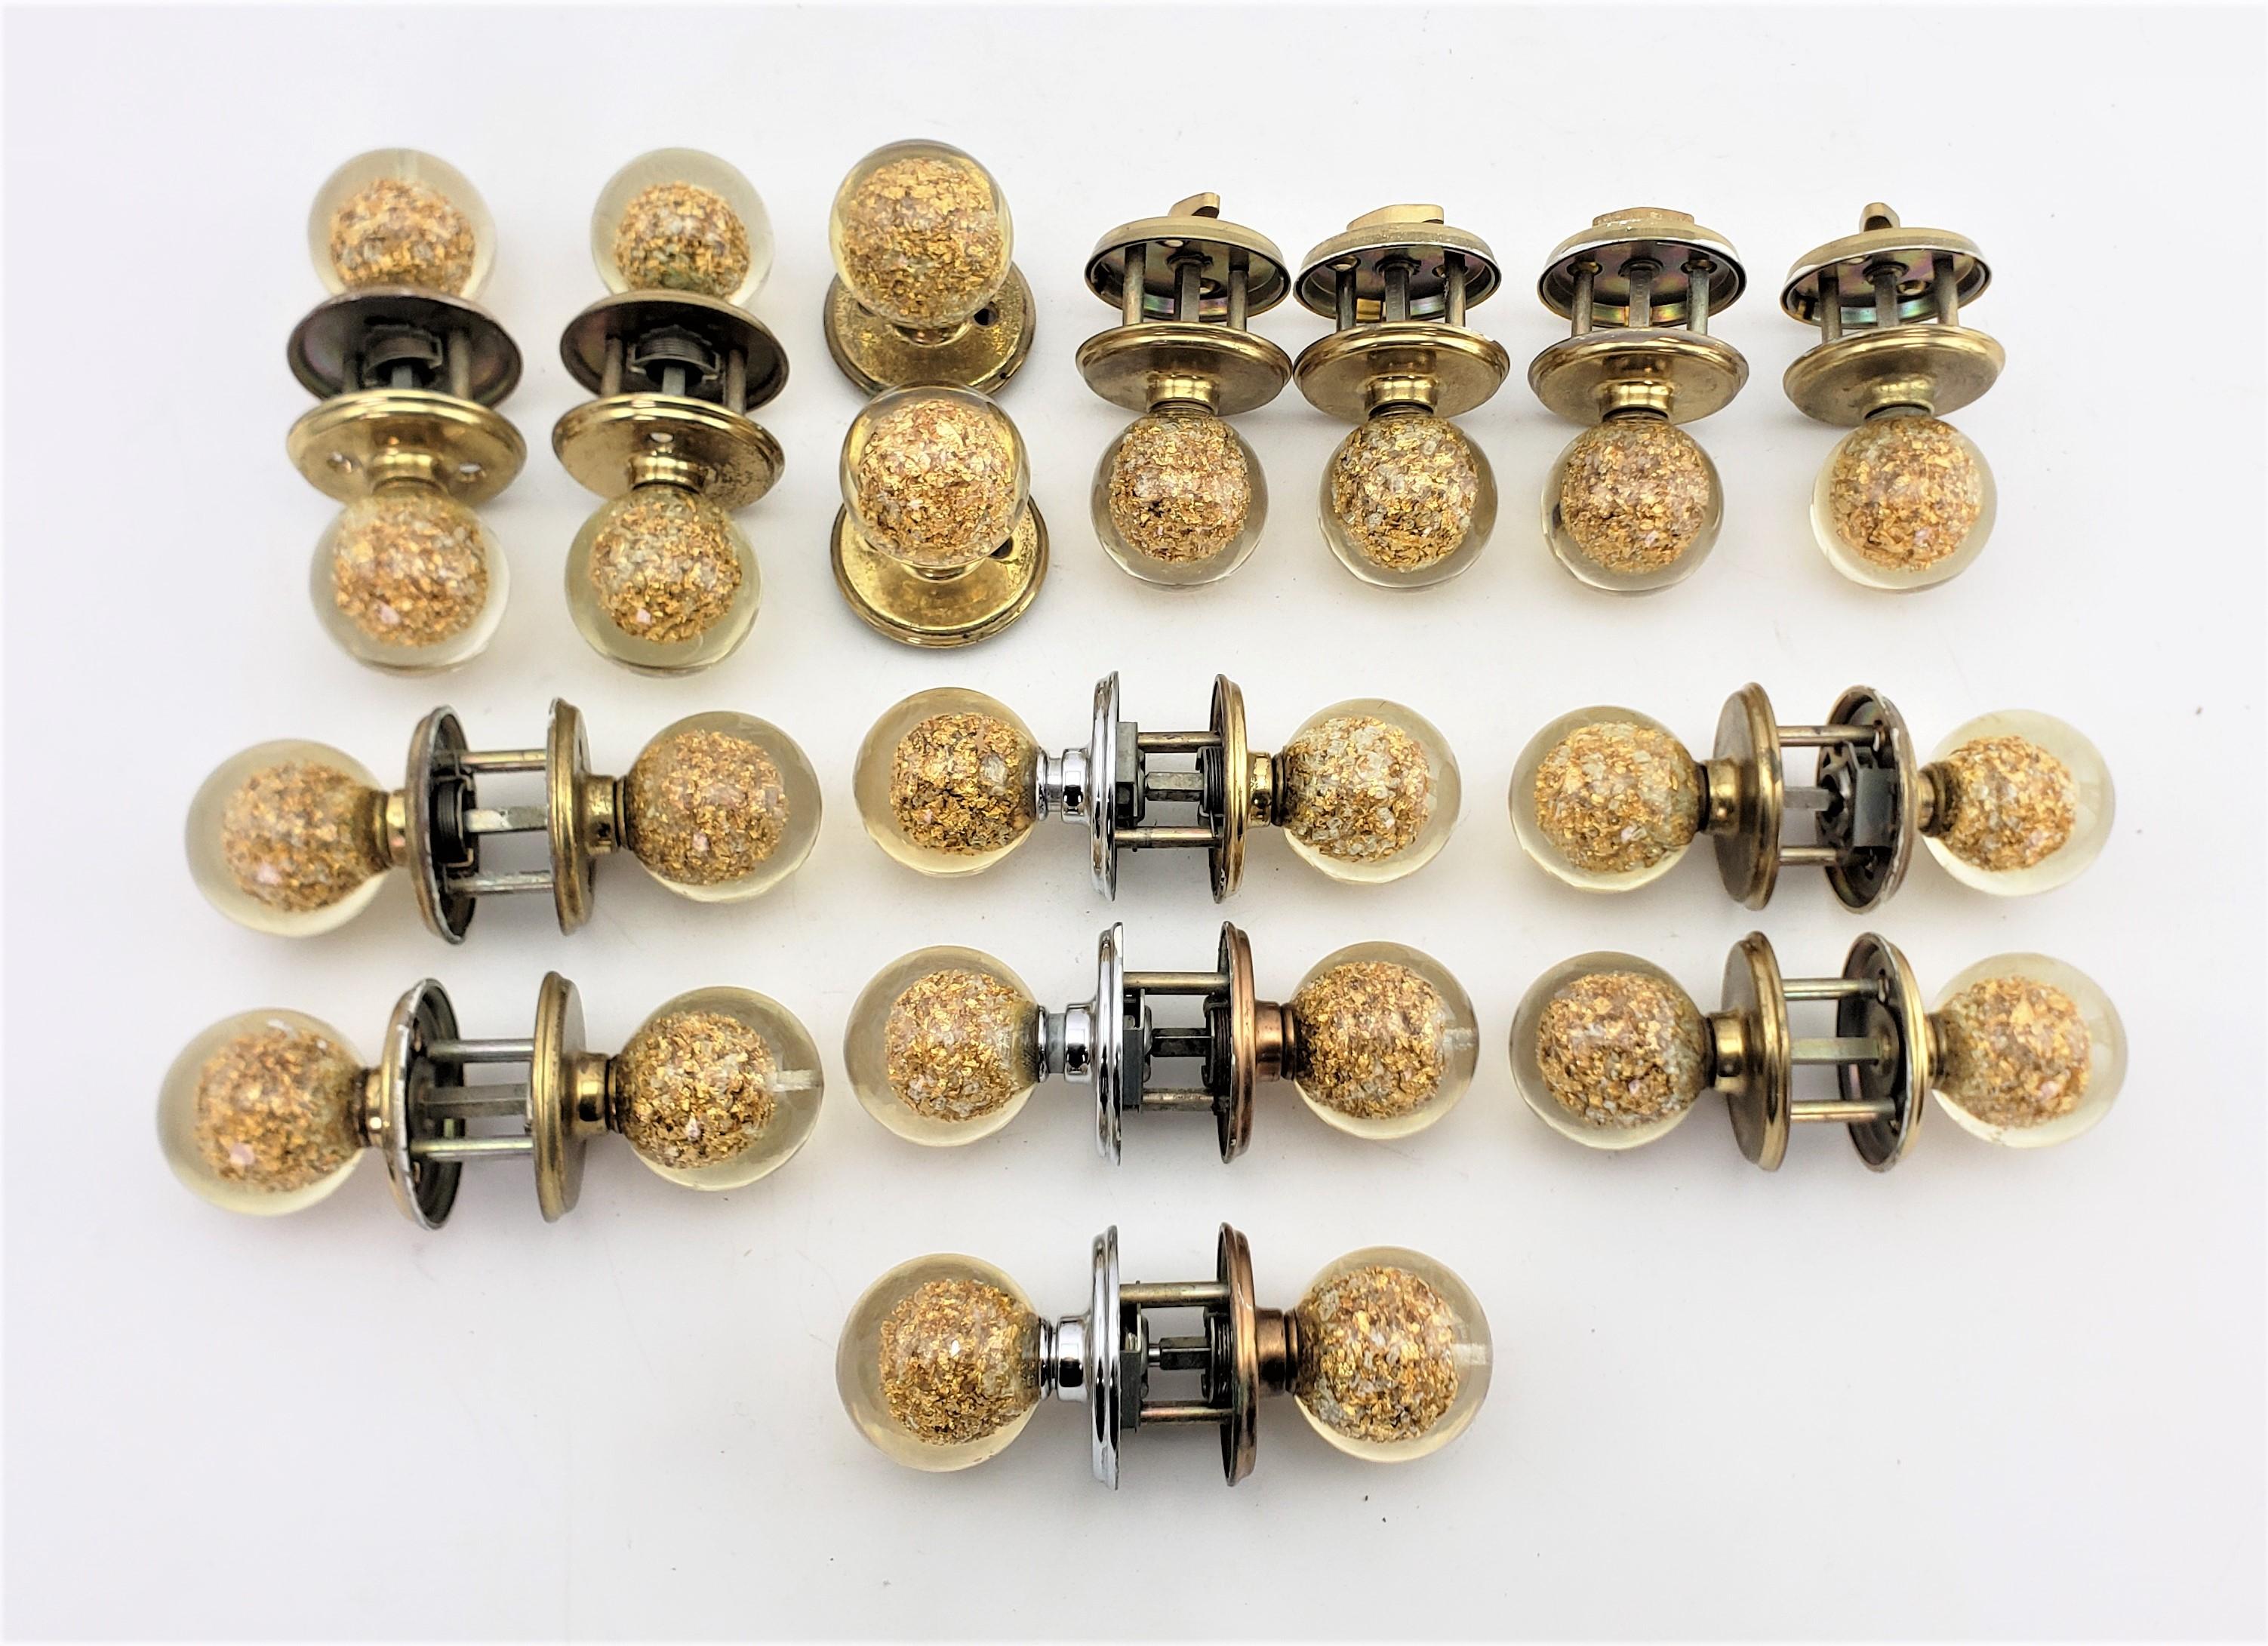 This set of door knobs and hardware were designed by Ruth Richmond for Weiser in approximately 1970 and done in the period Mid-Century Modern, or Hollywood Regency style. The knobs themselves are a signature style for Ruth Richmond and are composed